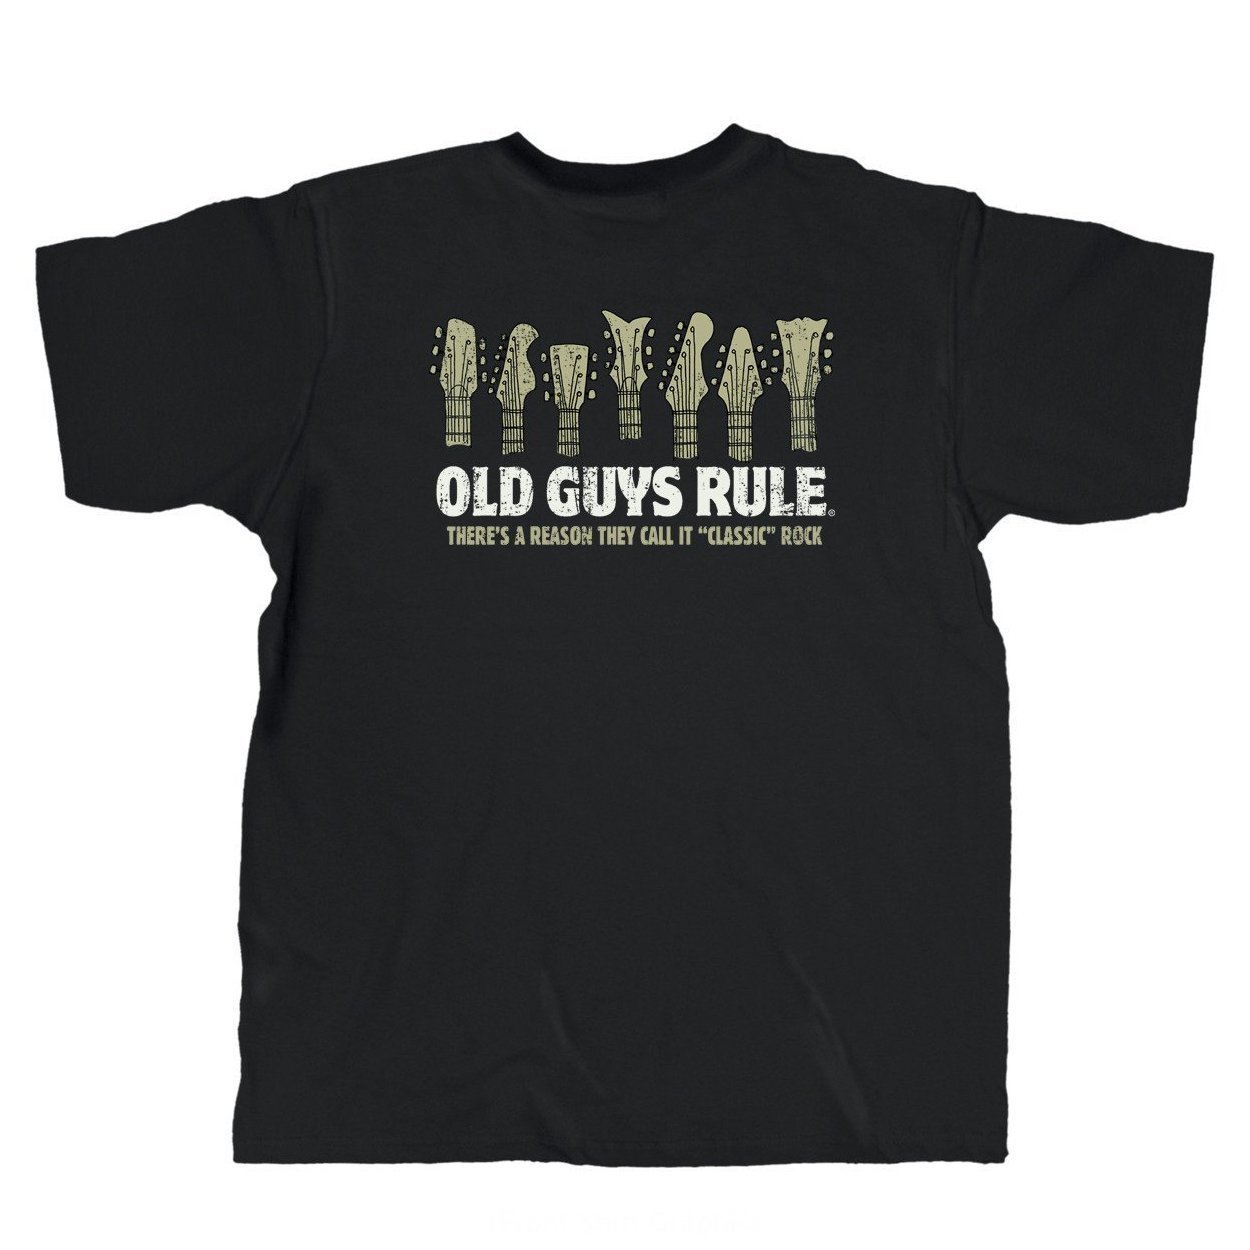 Old Guys T-Shirt - Classic Rock - Old Guys Rule - Official Online Store Largest Selection Authentic Old Guys Rule T-Shirts, Hats, and More!